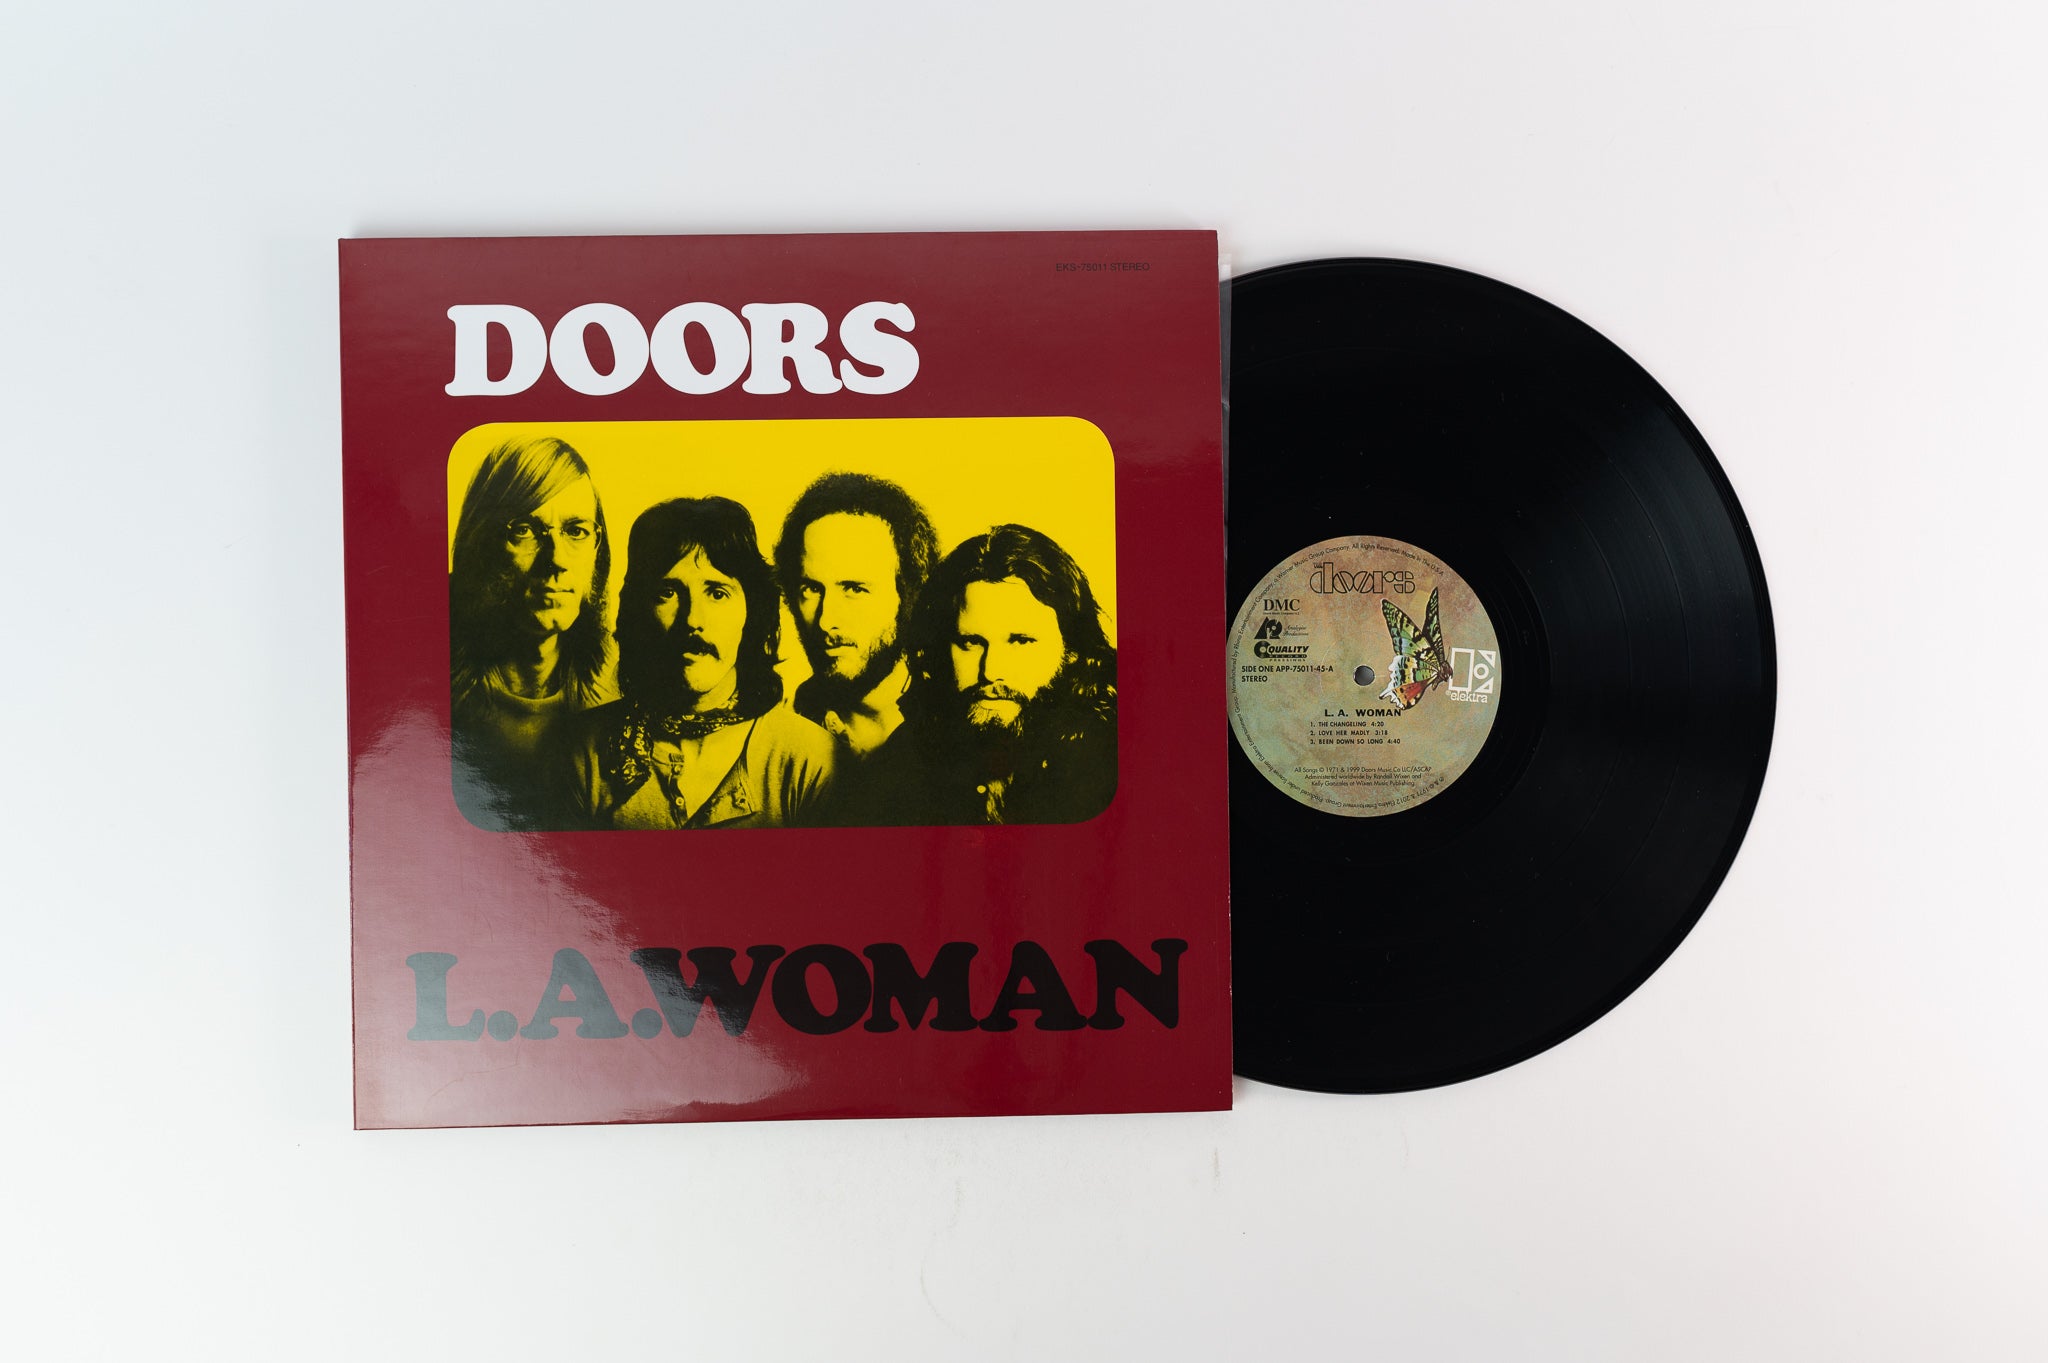 The Doors - L.A. Woman on Elektra Analogue Productions 200 Gram Reissue